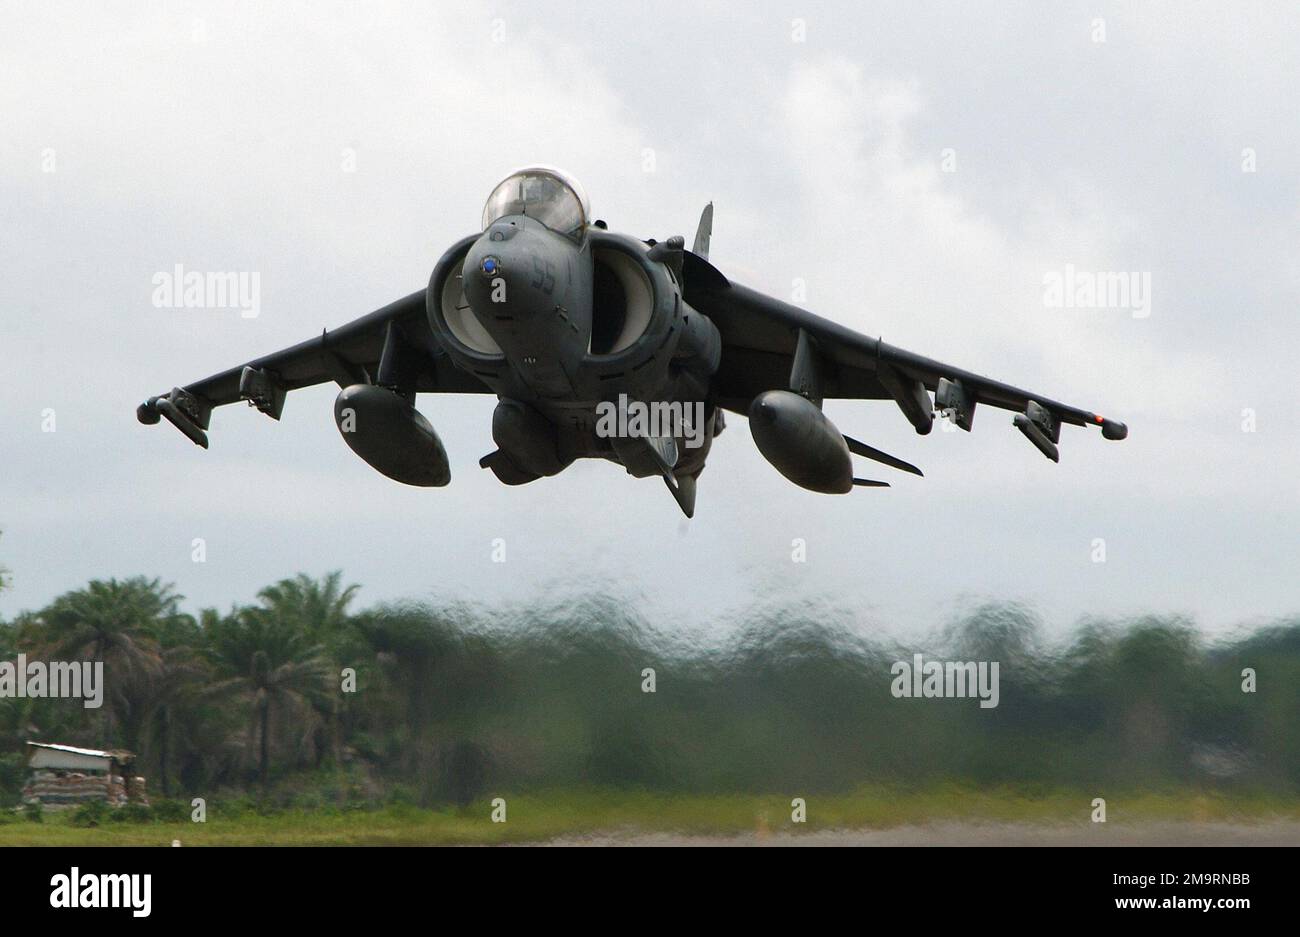 A US Marine Corp (USMC) AV-8B Harrier aircraft, deployed with the 398th Air Expeditionary Group (AEG), takes off at Freetown International Airport, Sierra Leone. The 398th AEG is currently in Sierra Leone to provide personnel recovery and emergency evacuation capability for the Humanitarian Assistance Survey Teams (HAST) and the Fleet Anti-terrorism Security Teams (FAST) in Liberia, during Joint Task Force (JTF) Liberia. Subject Operation/Series: JTF LIBERIA Base: Freetown International Airport Country: Sierra Leone (SLE) Stock Photo